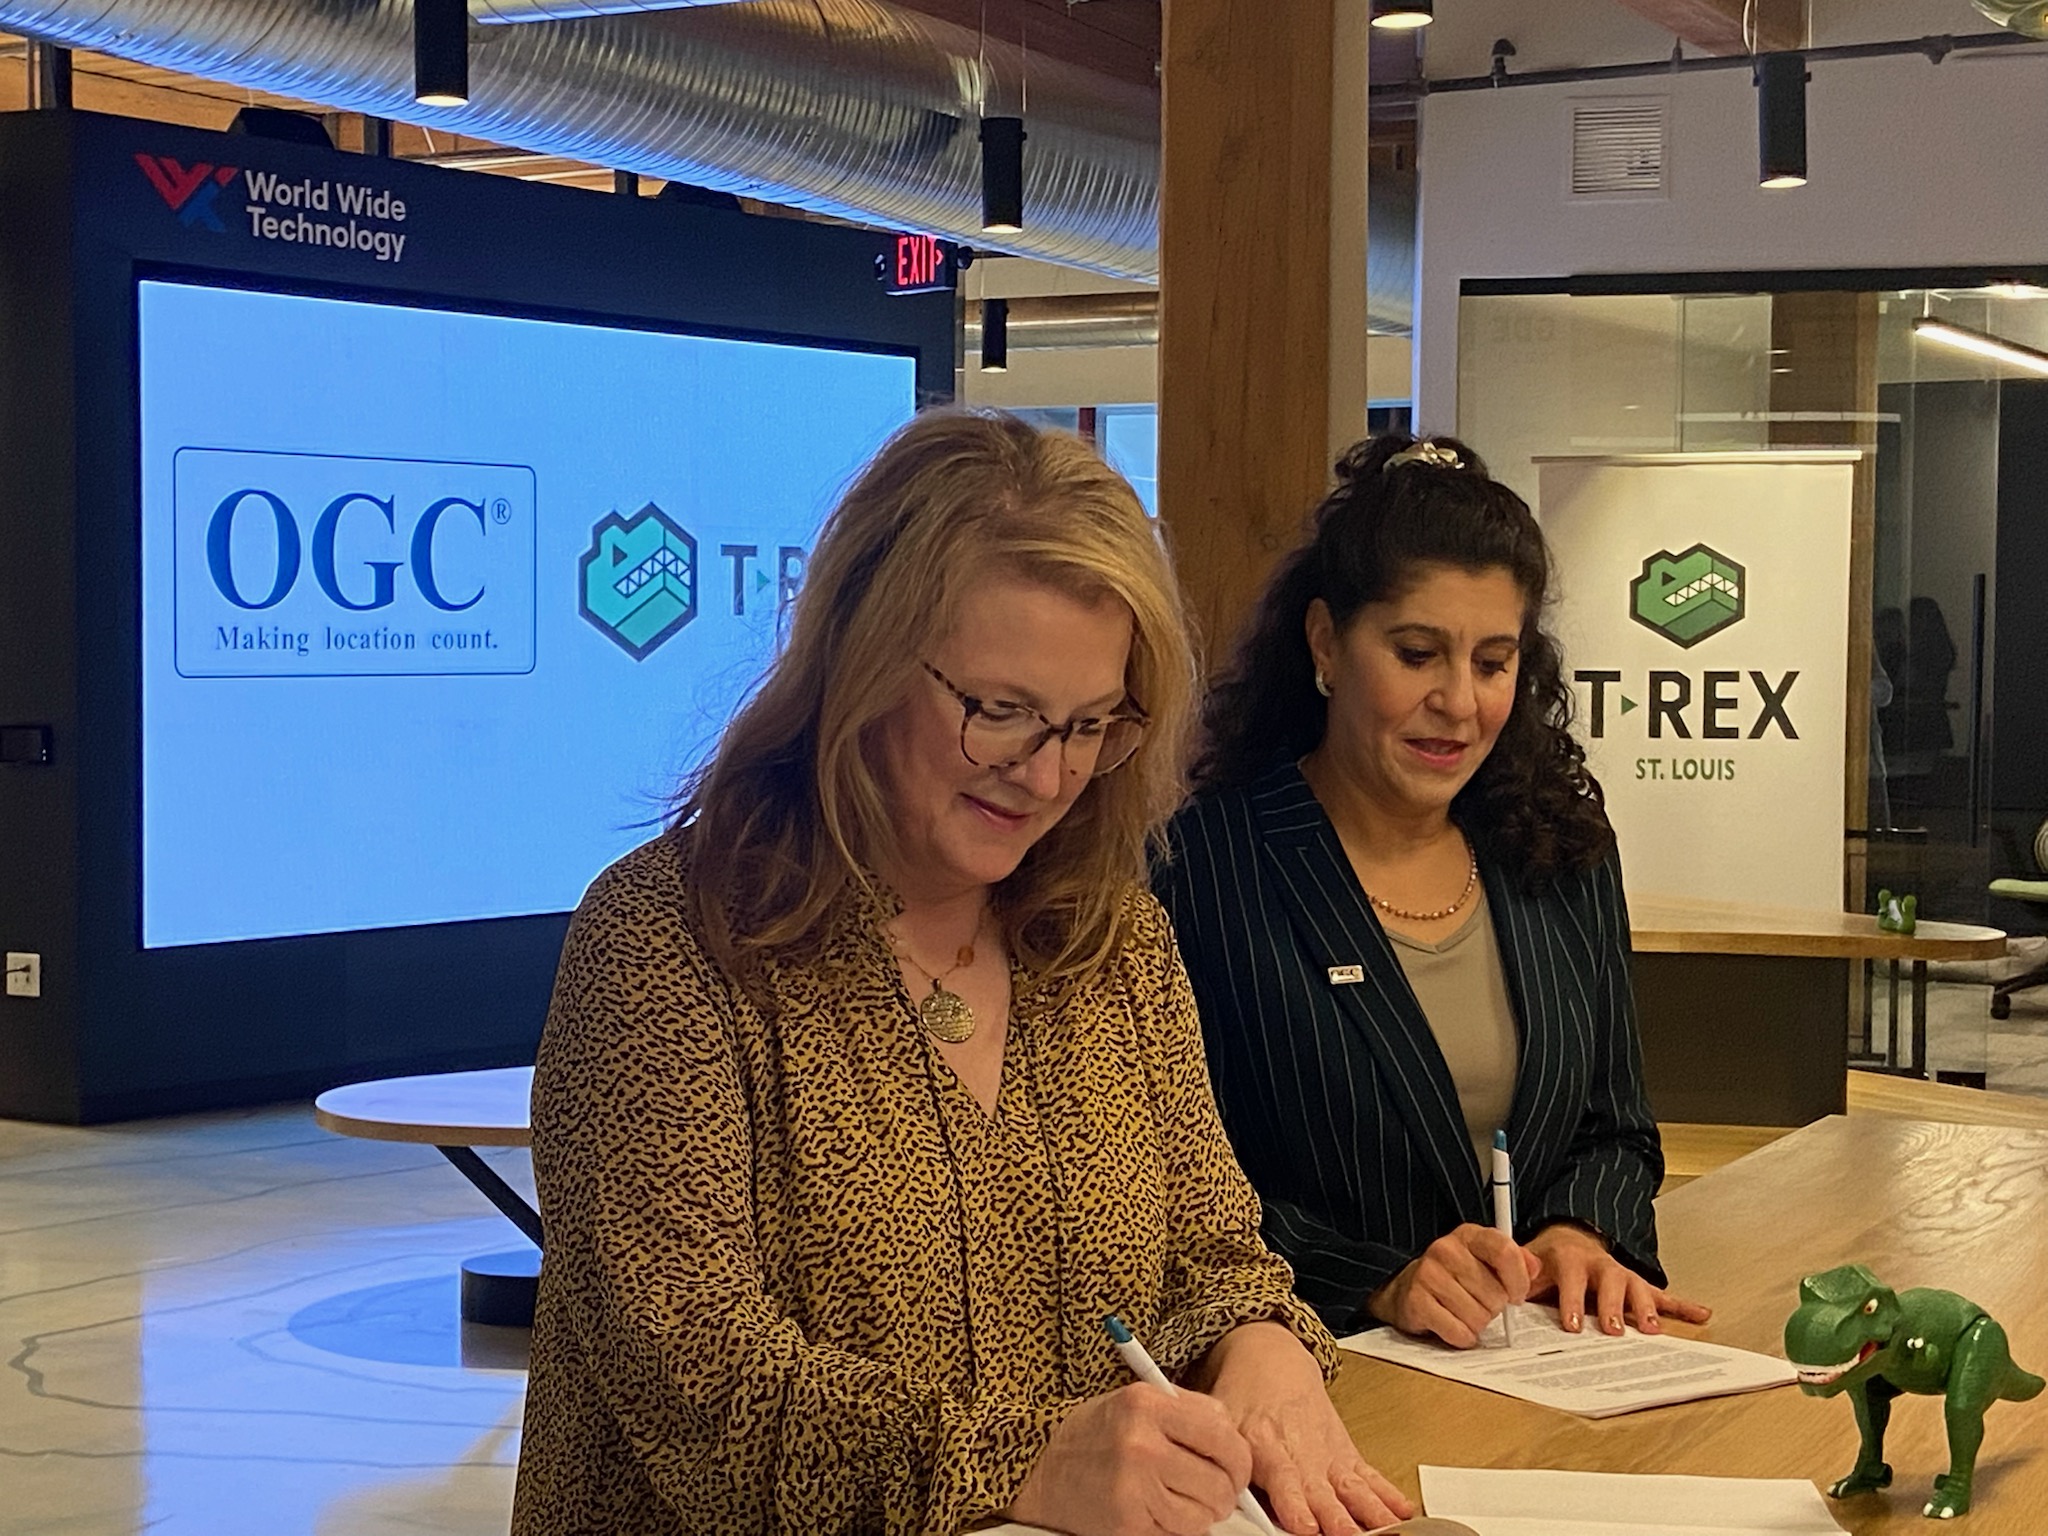 Nadine Alameh, OGC CEO and Patricia Hagen, President & Executive Director of T-REX signing a partnership agreement